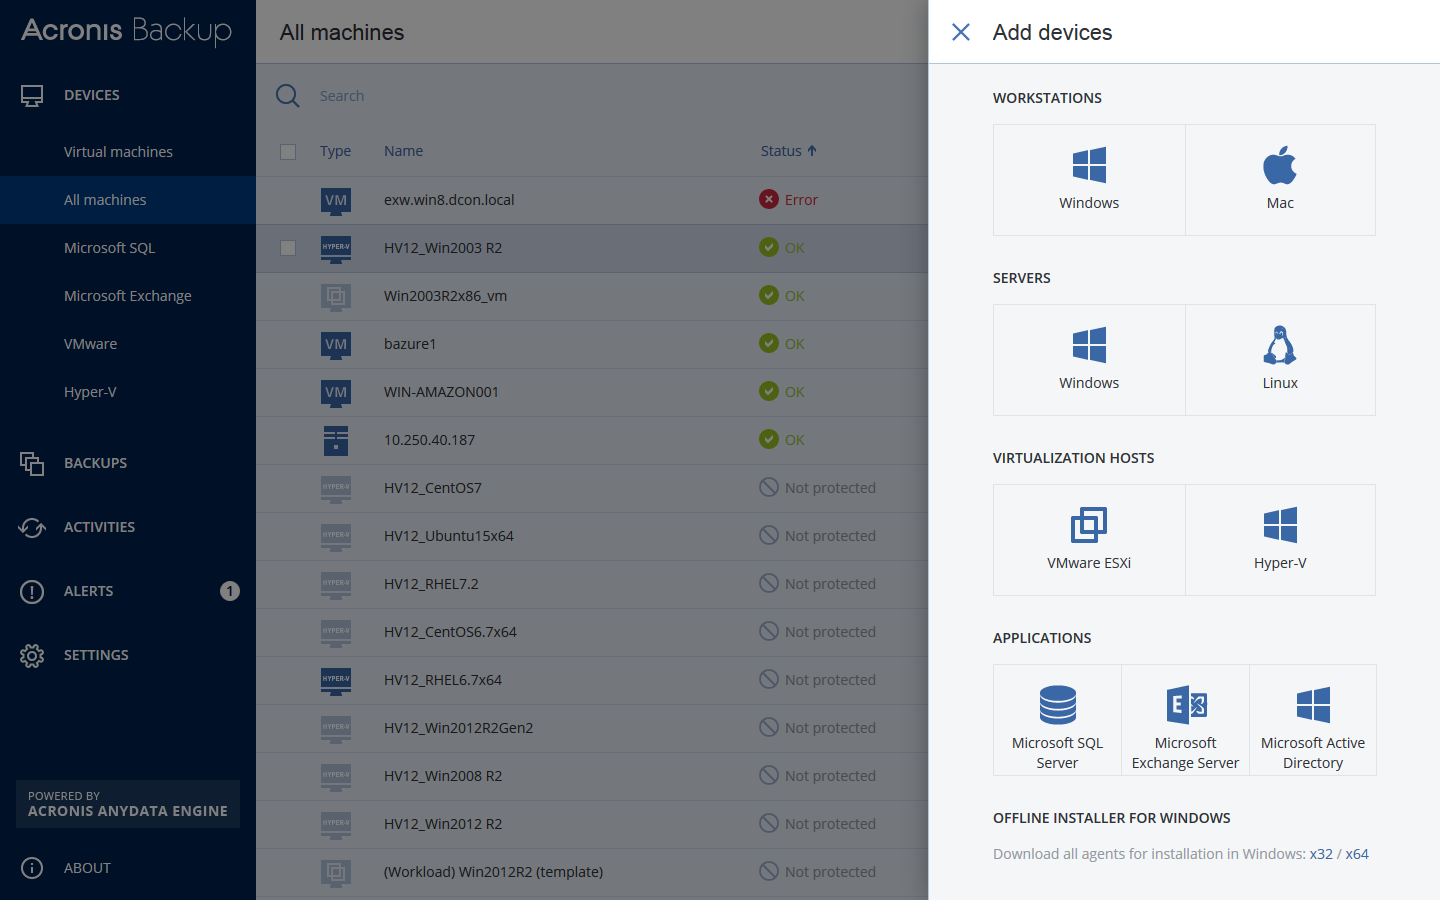 Protect your VMs with Acronis Backup 12 - the world